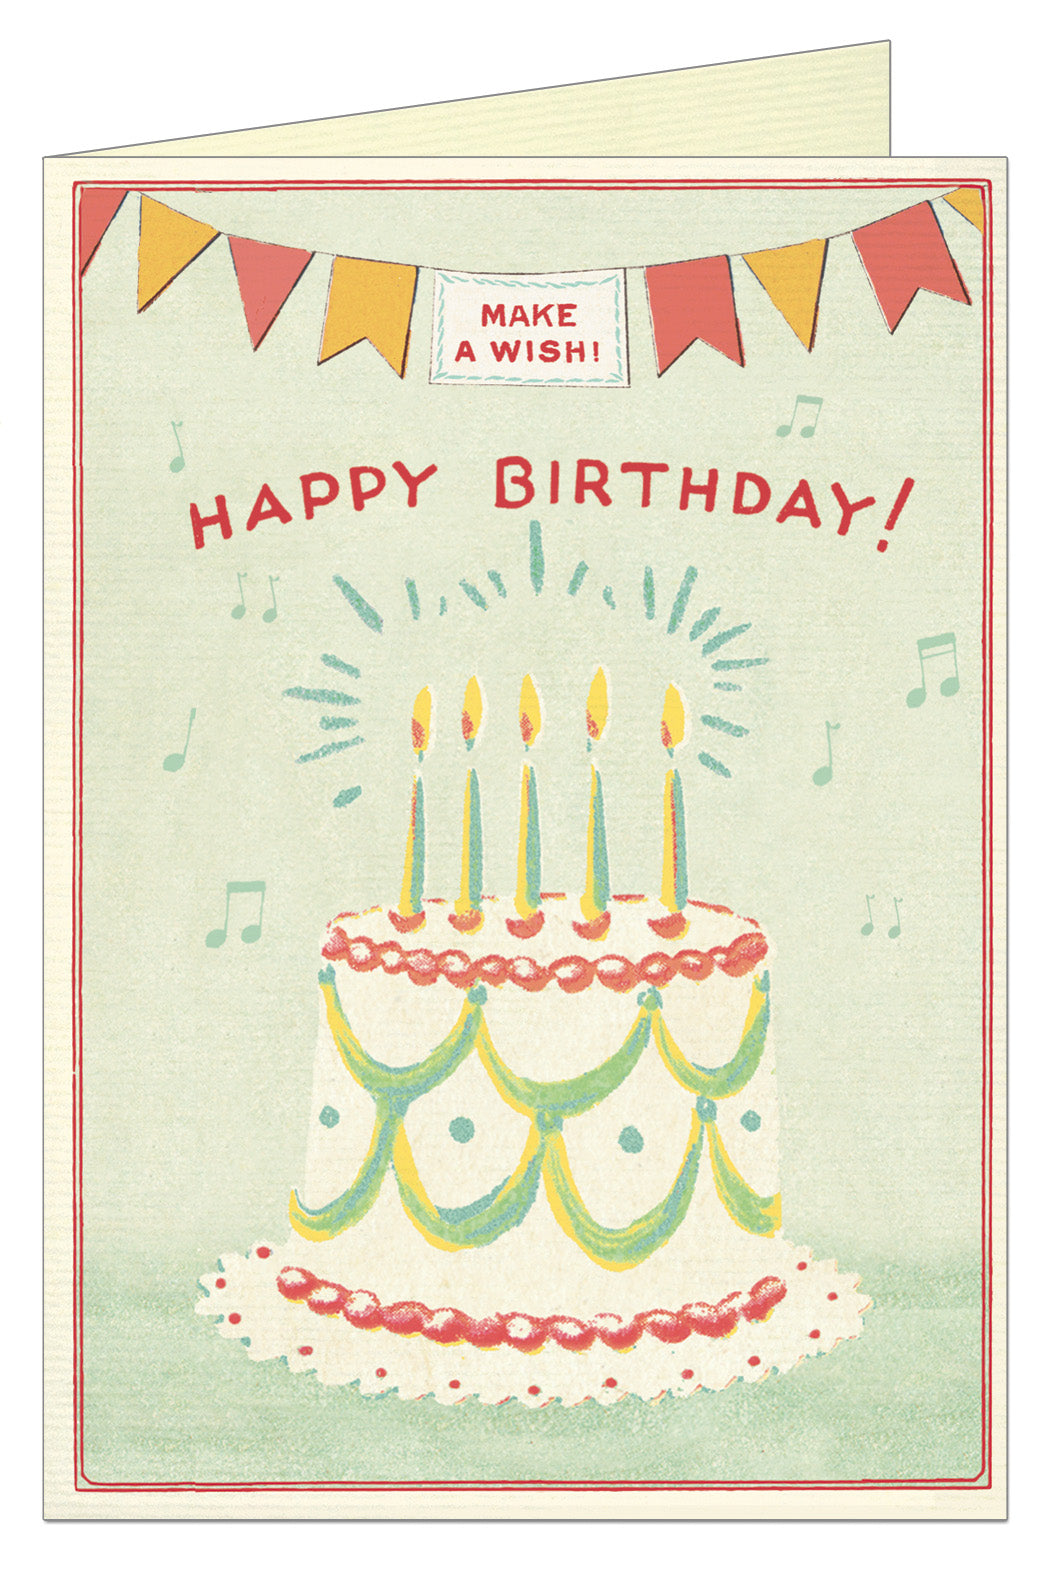 Happy birthday card design with cake Royalty Free Vector